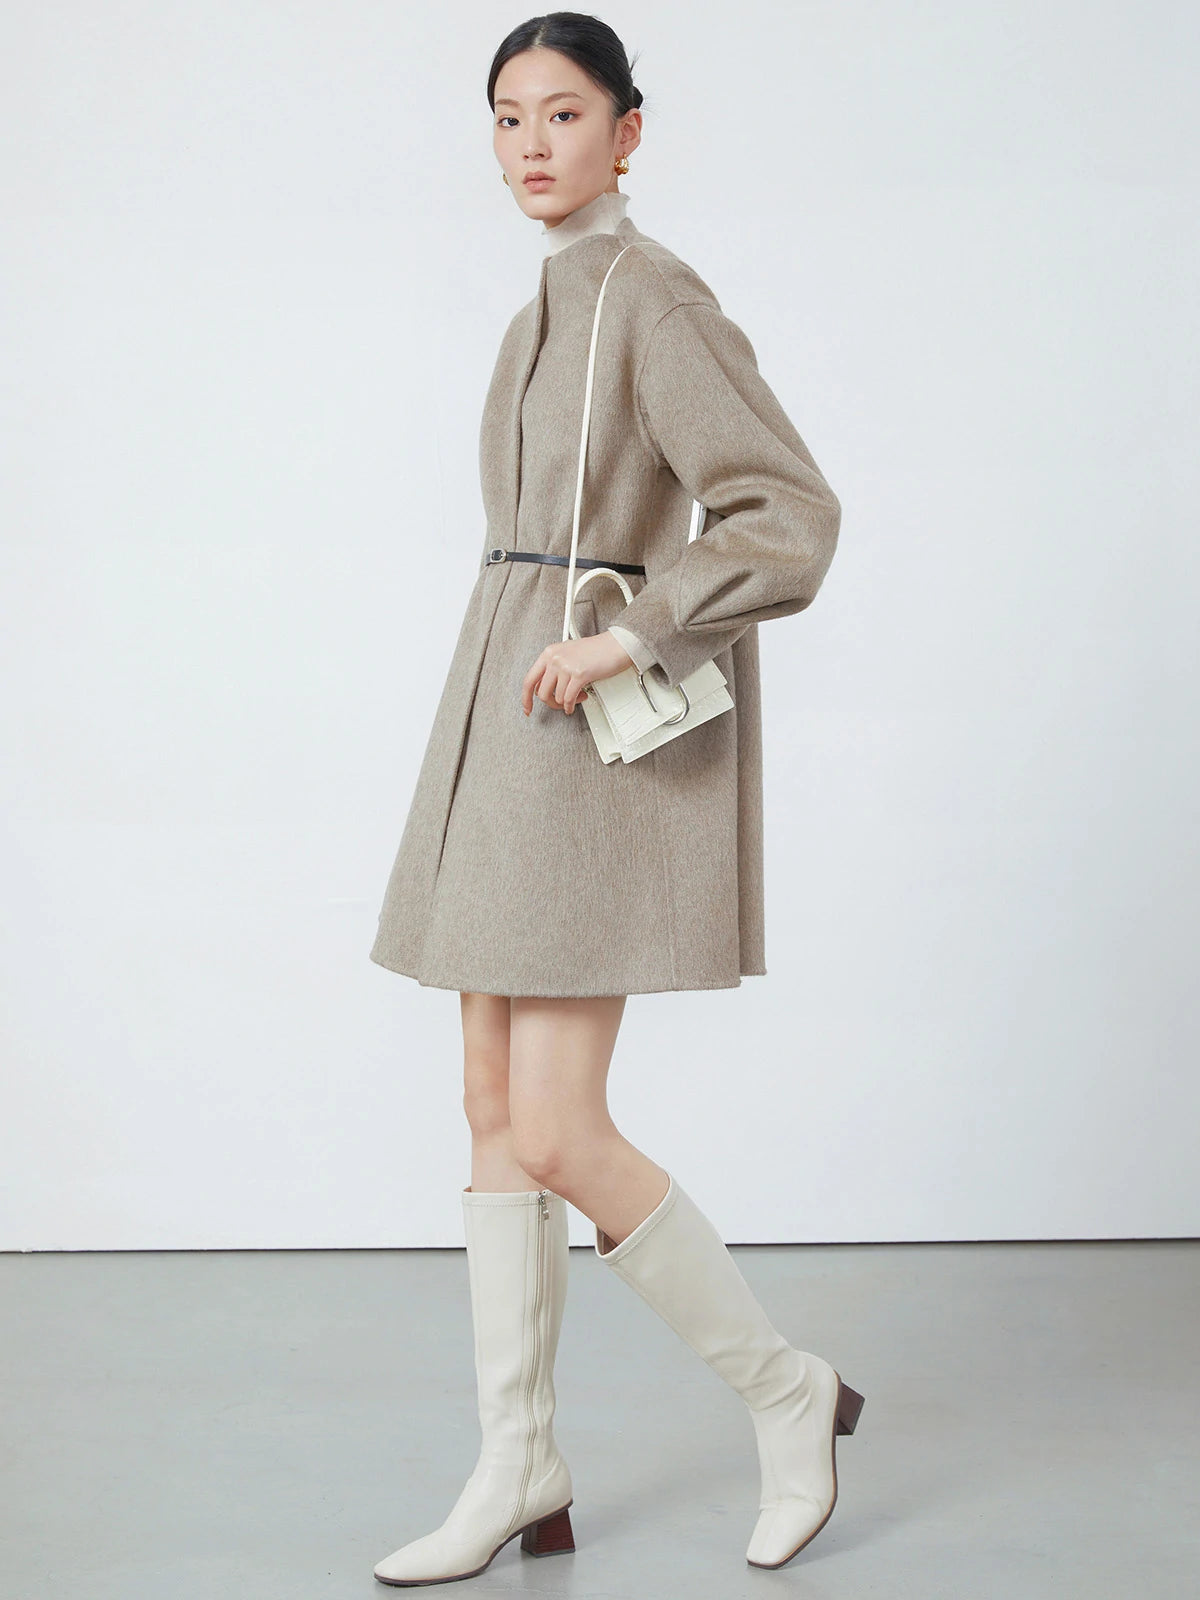 Bubble Sleeve Wool Coat for Comfort and Style: A fashionable choice for cold weather.